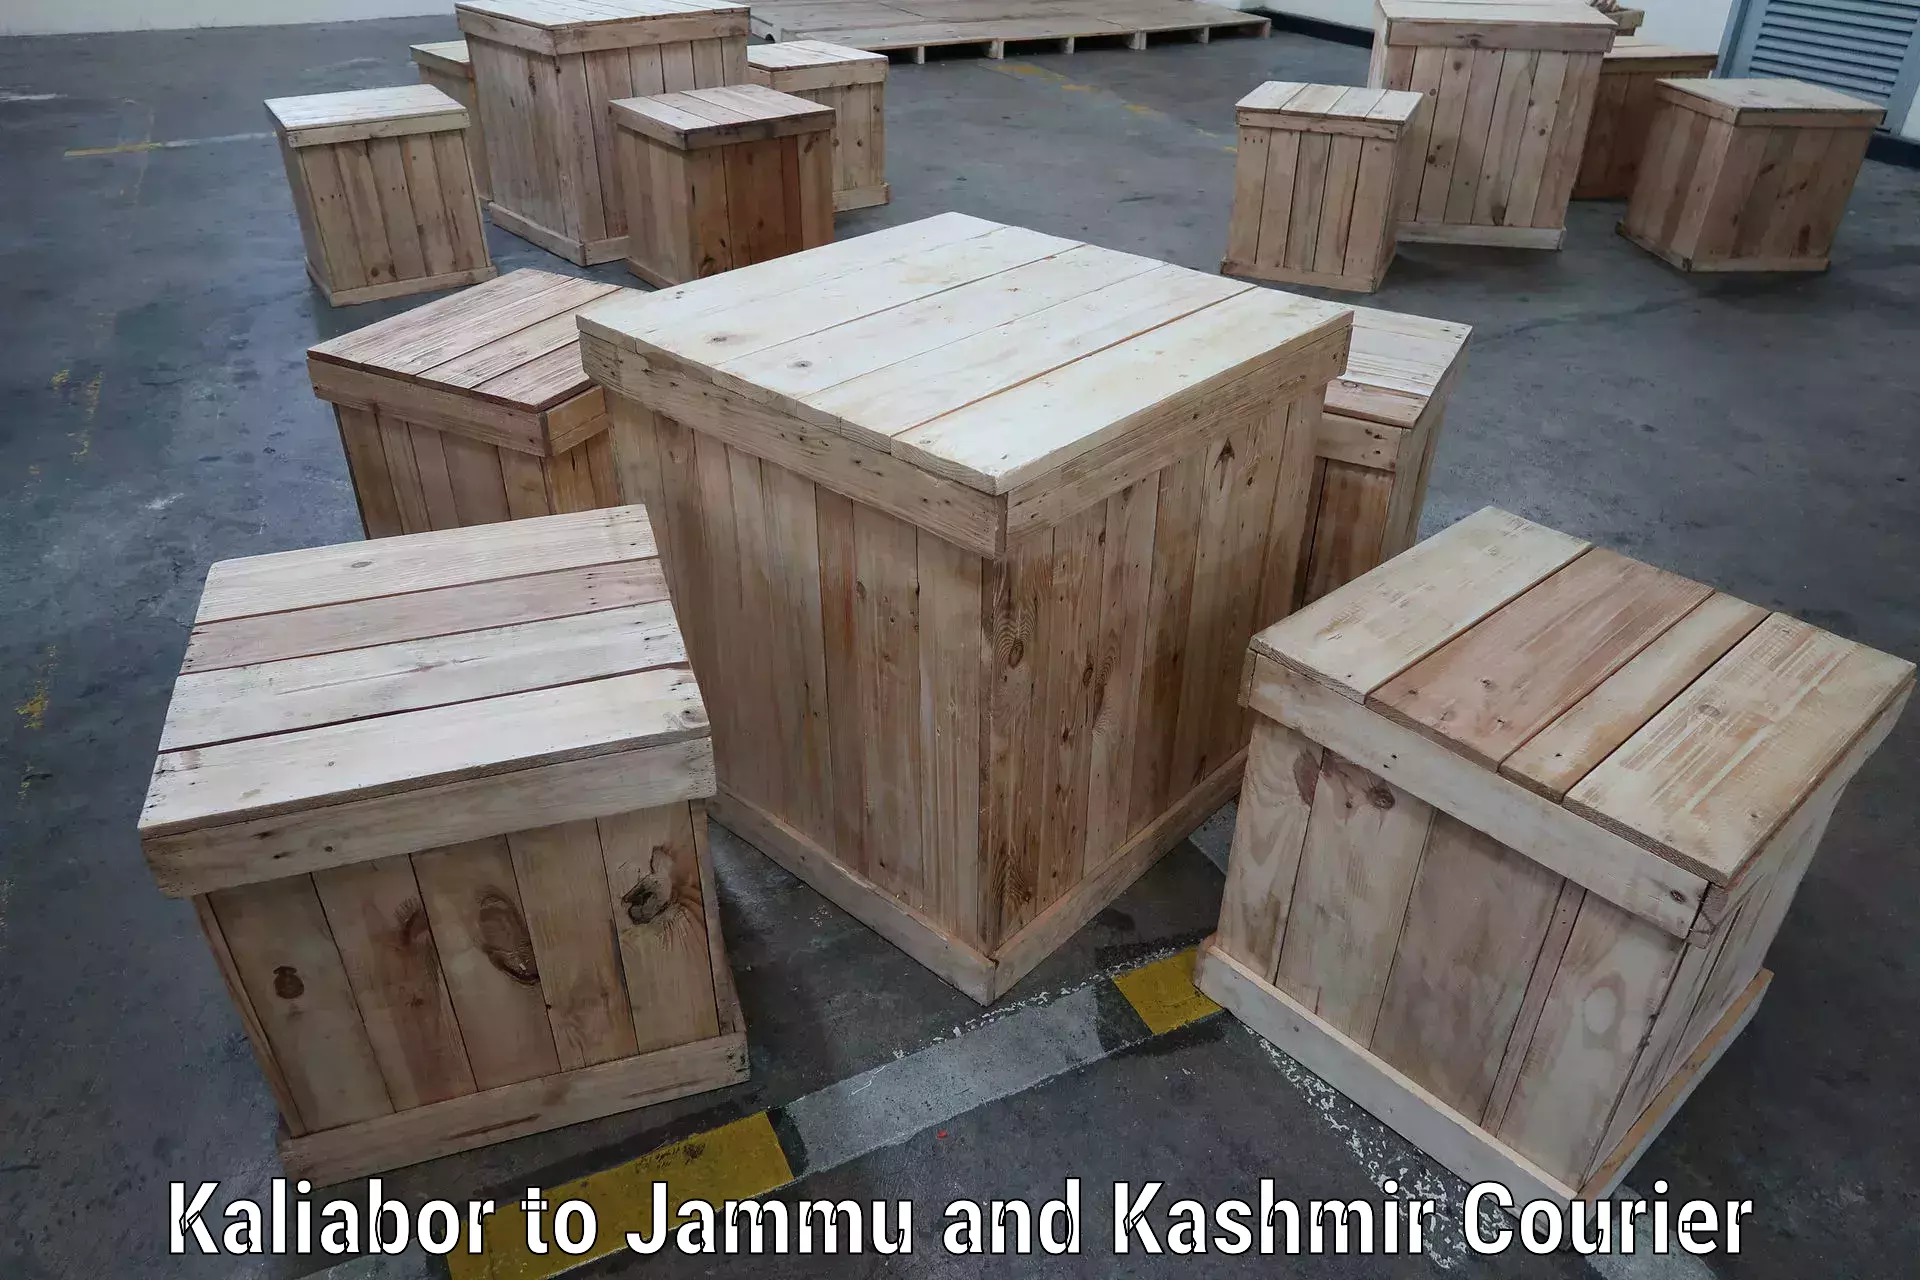 Same-day delivery options Kaliabor to Jammu and Kashmir